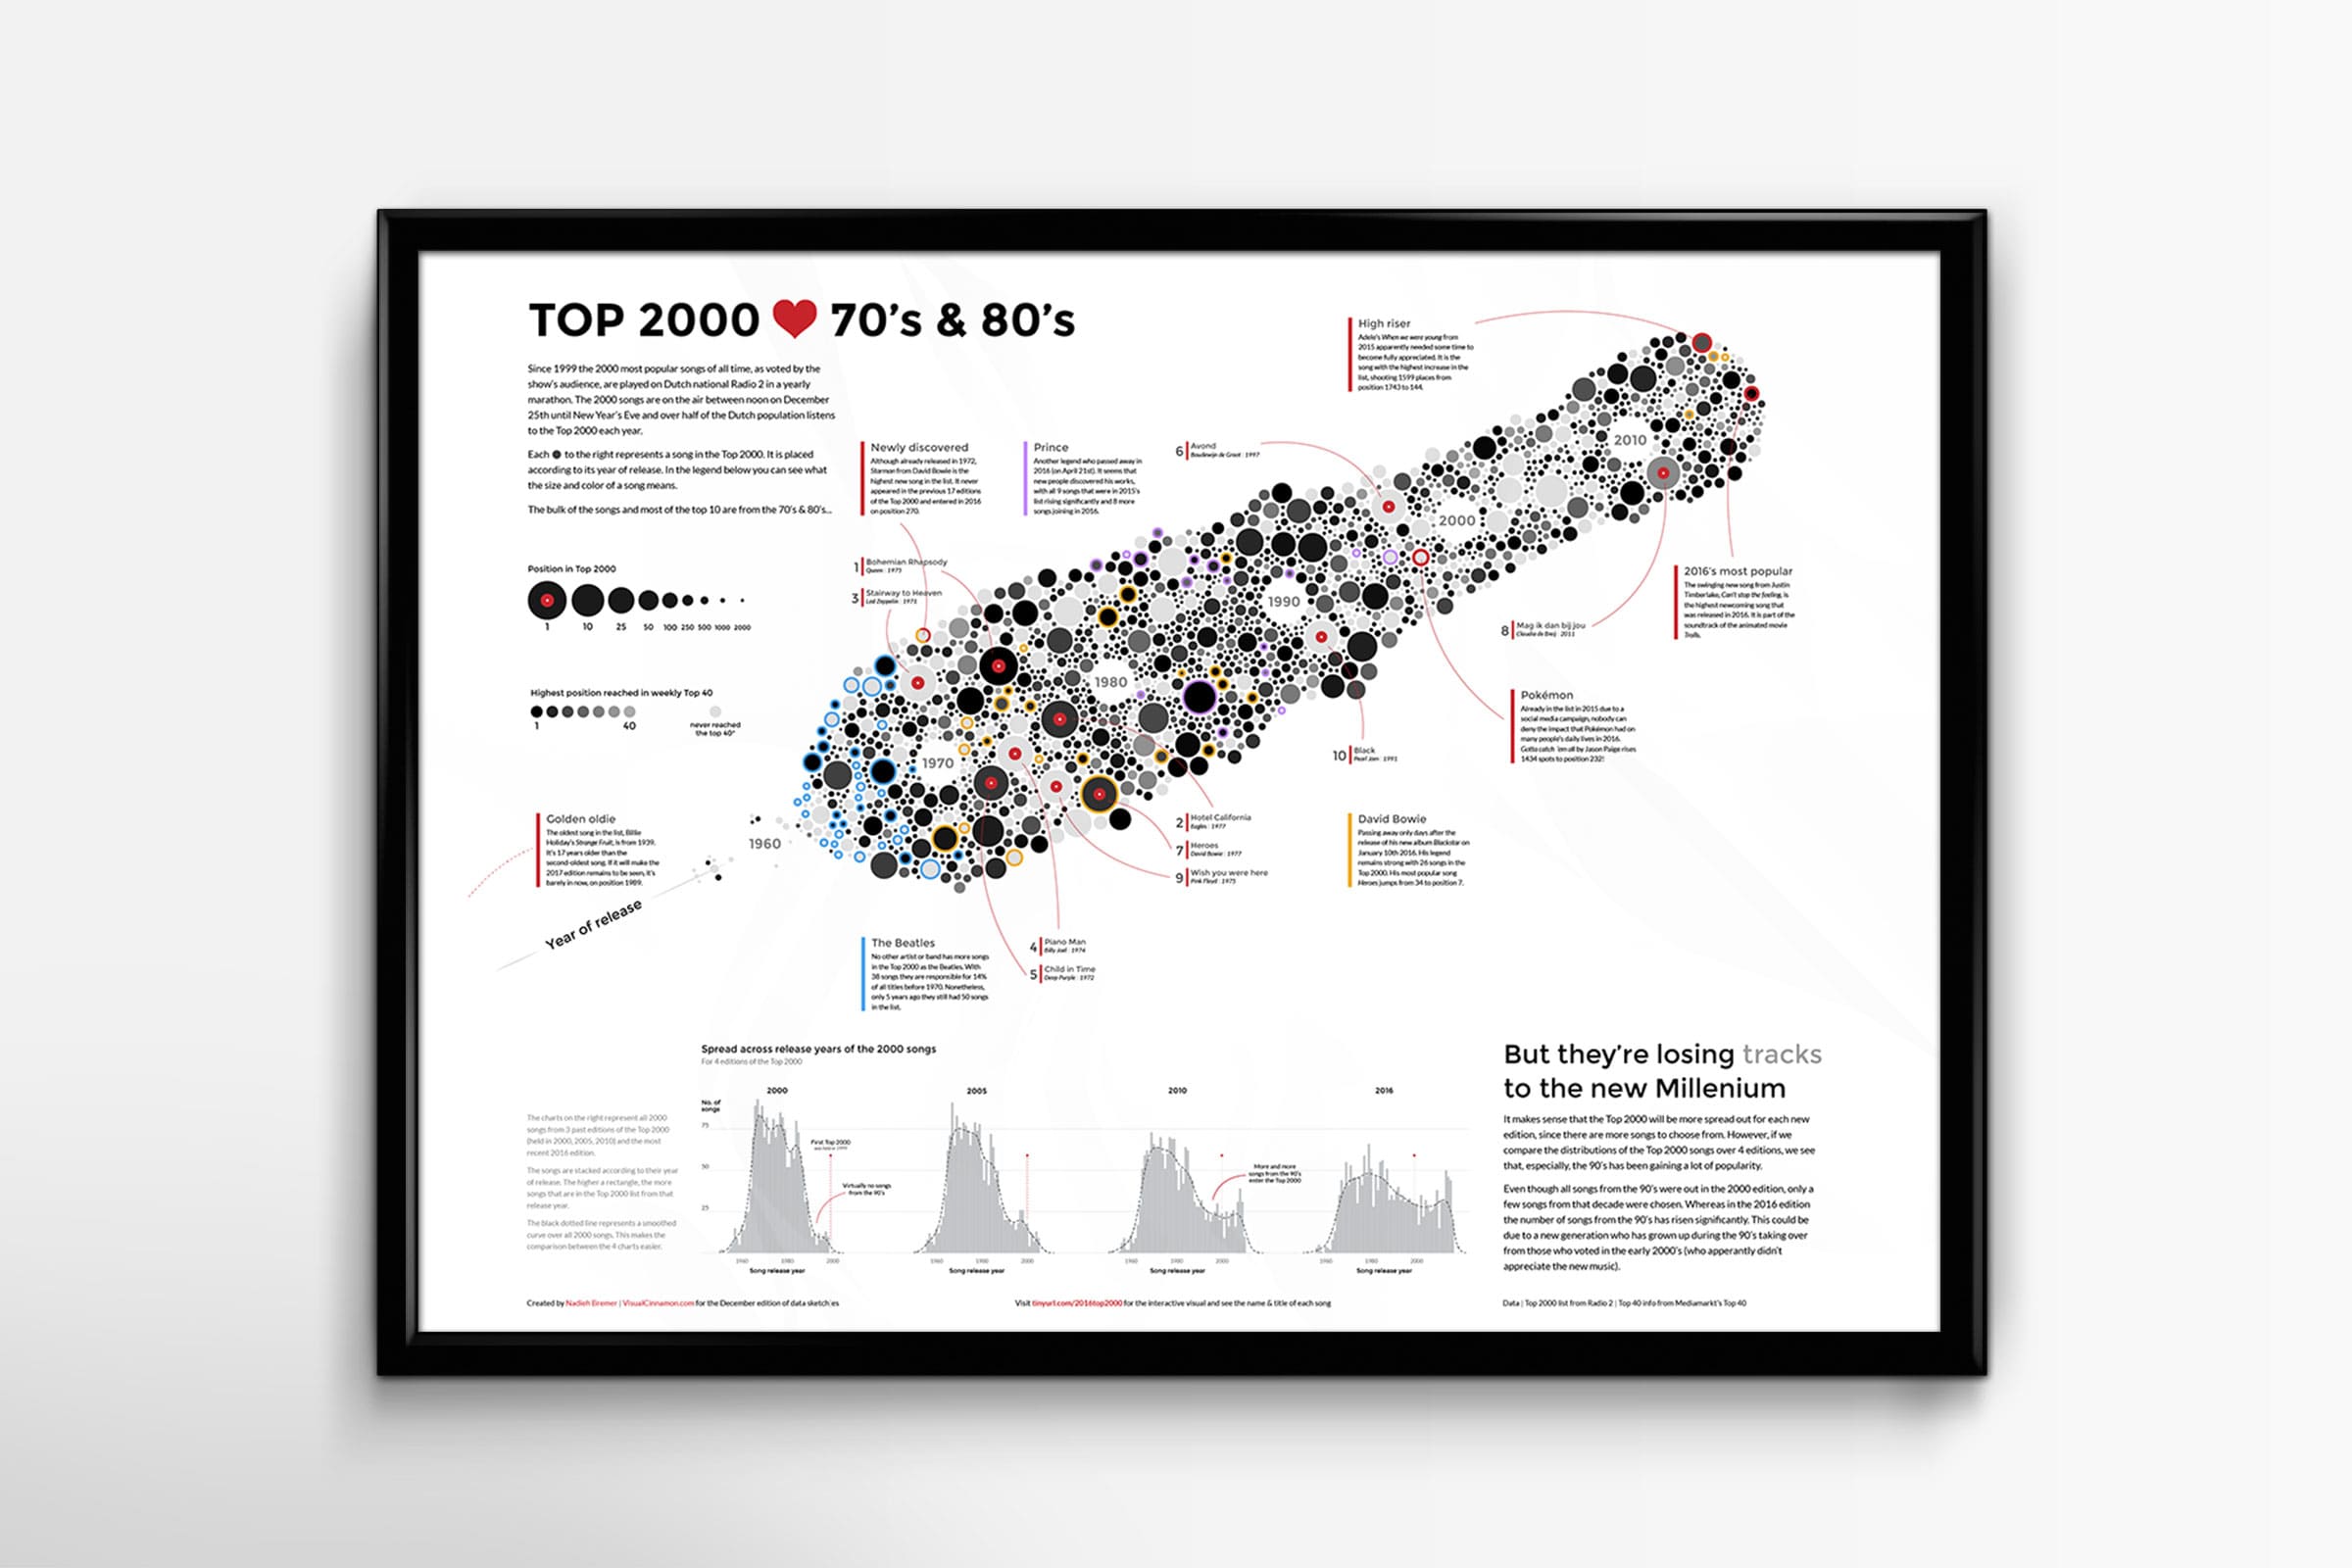 The final Top 2000 poster